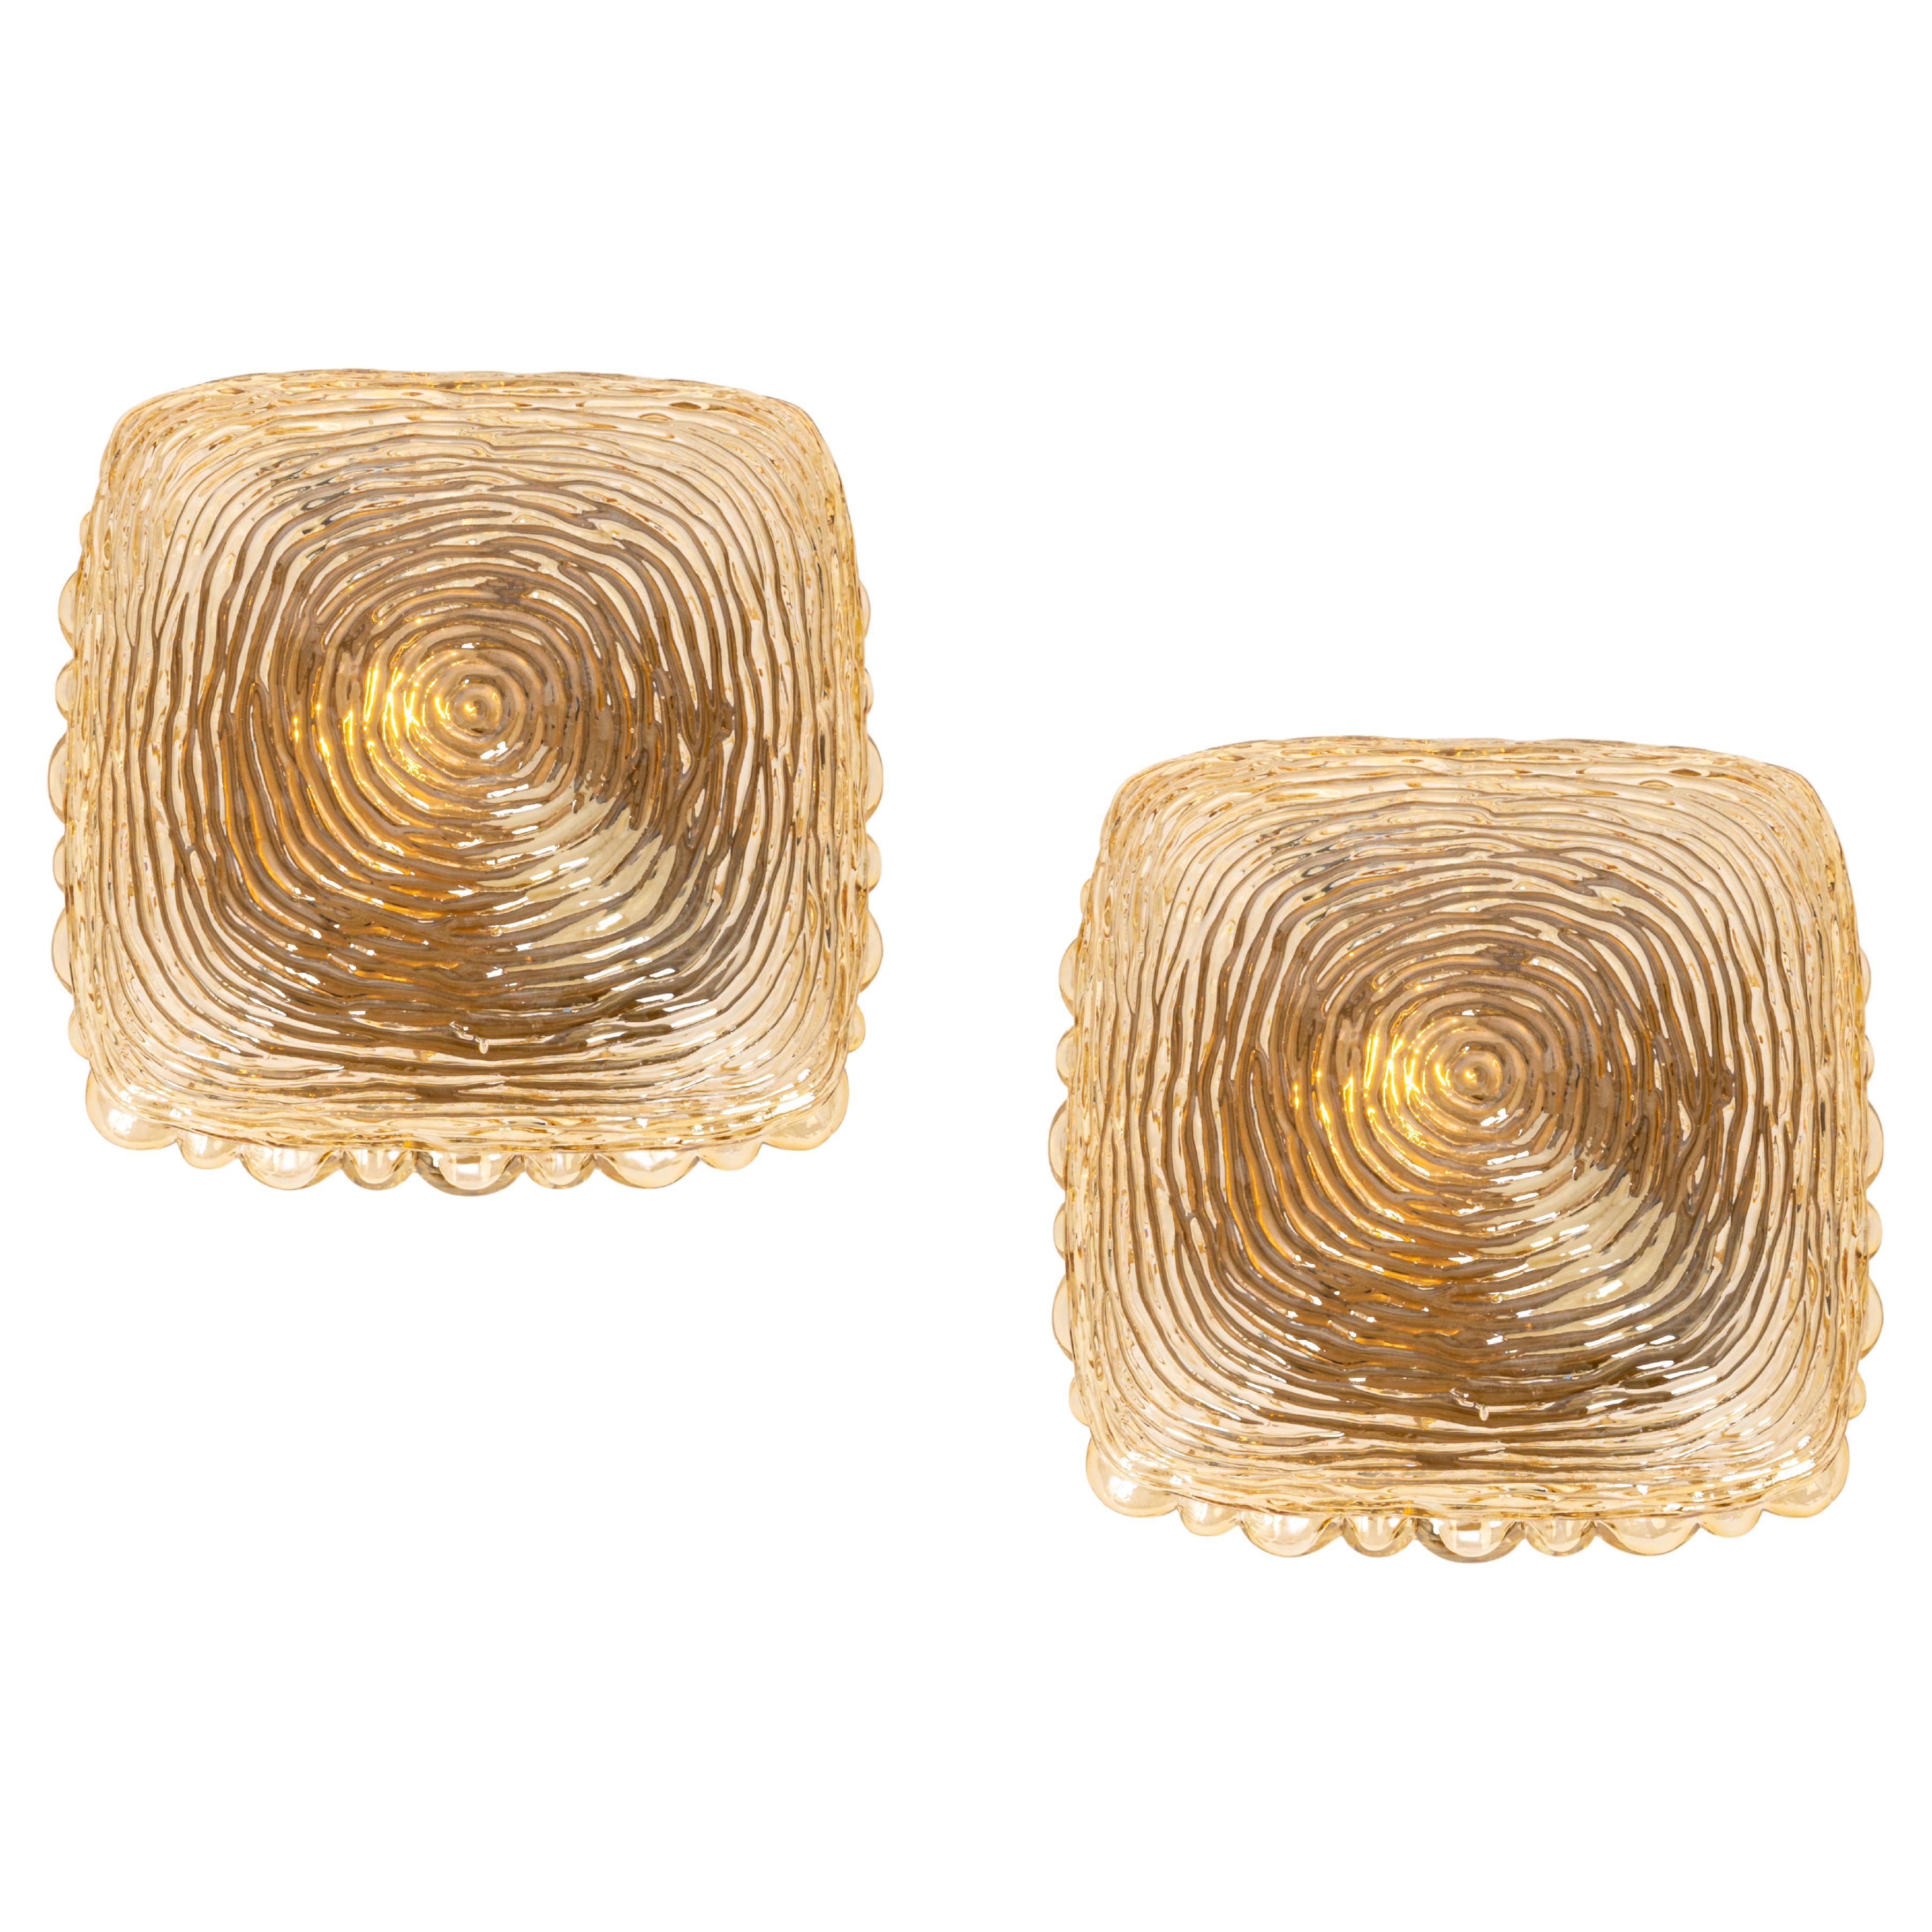 1 of 8 Pairs of Amber Glass Sconces in Thumbprint Shape, Germany, 1970s For Sale